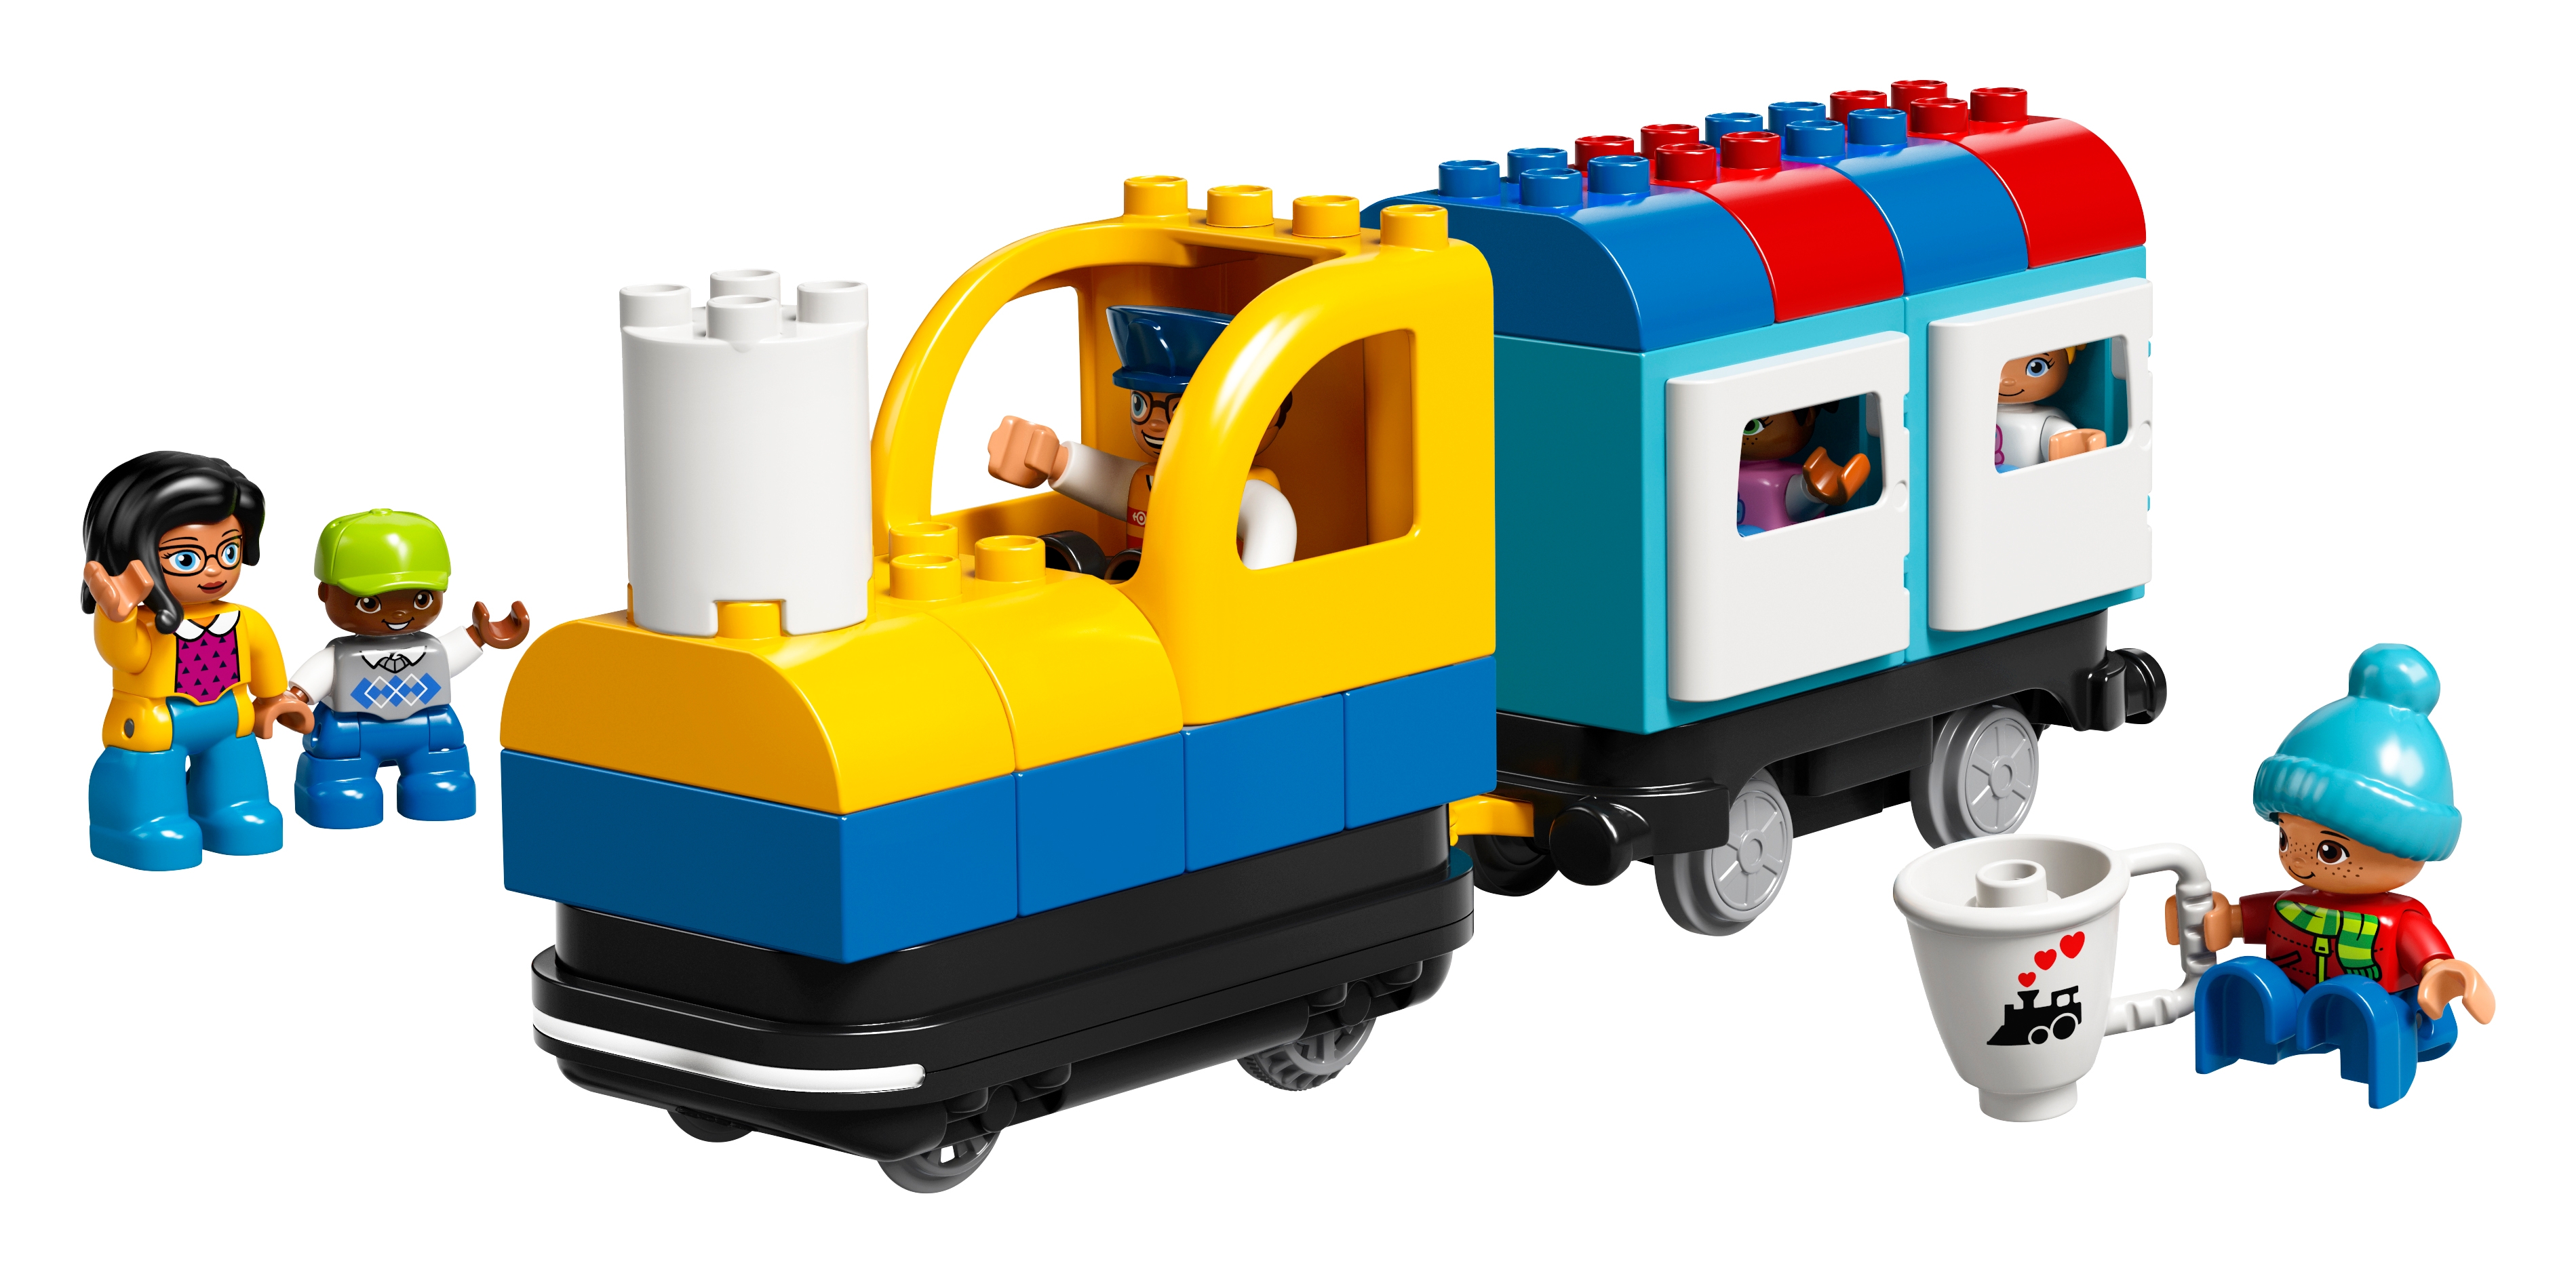 Coding Express 45025 | DUPLO® | Buy online at the Official LEGO